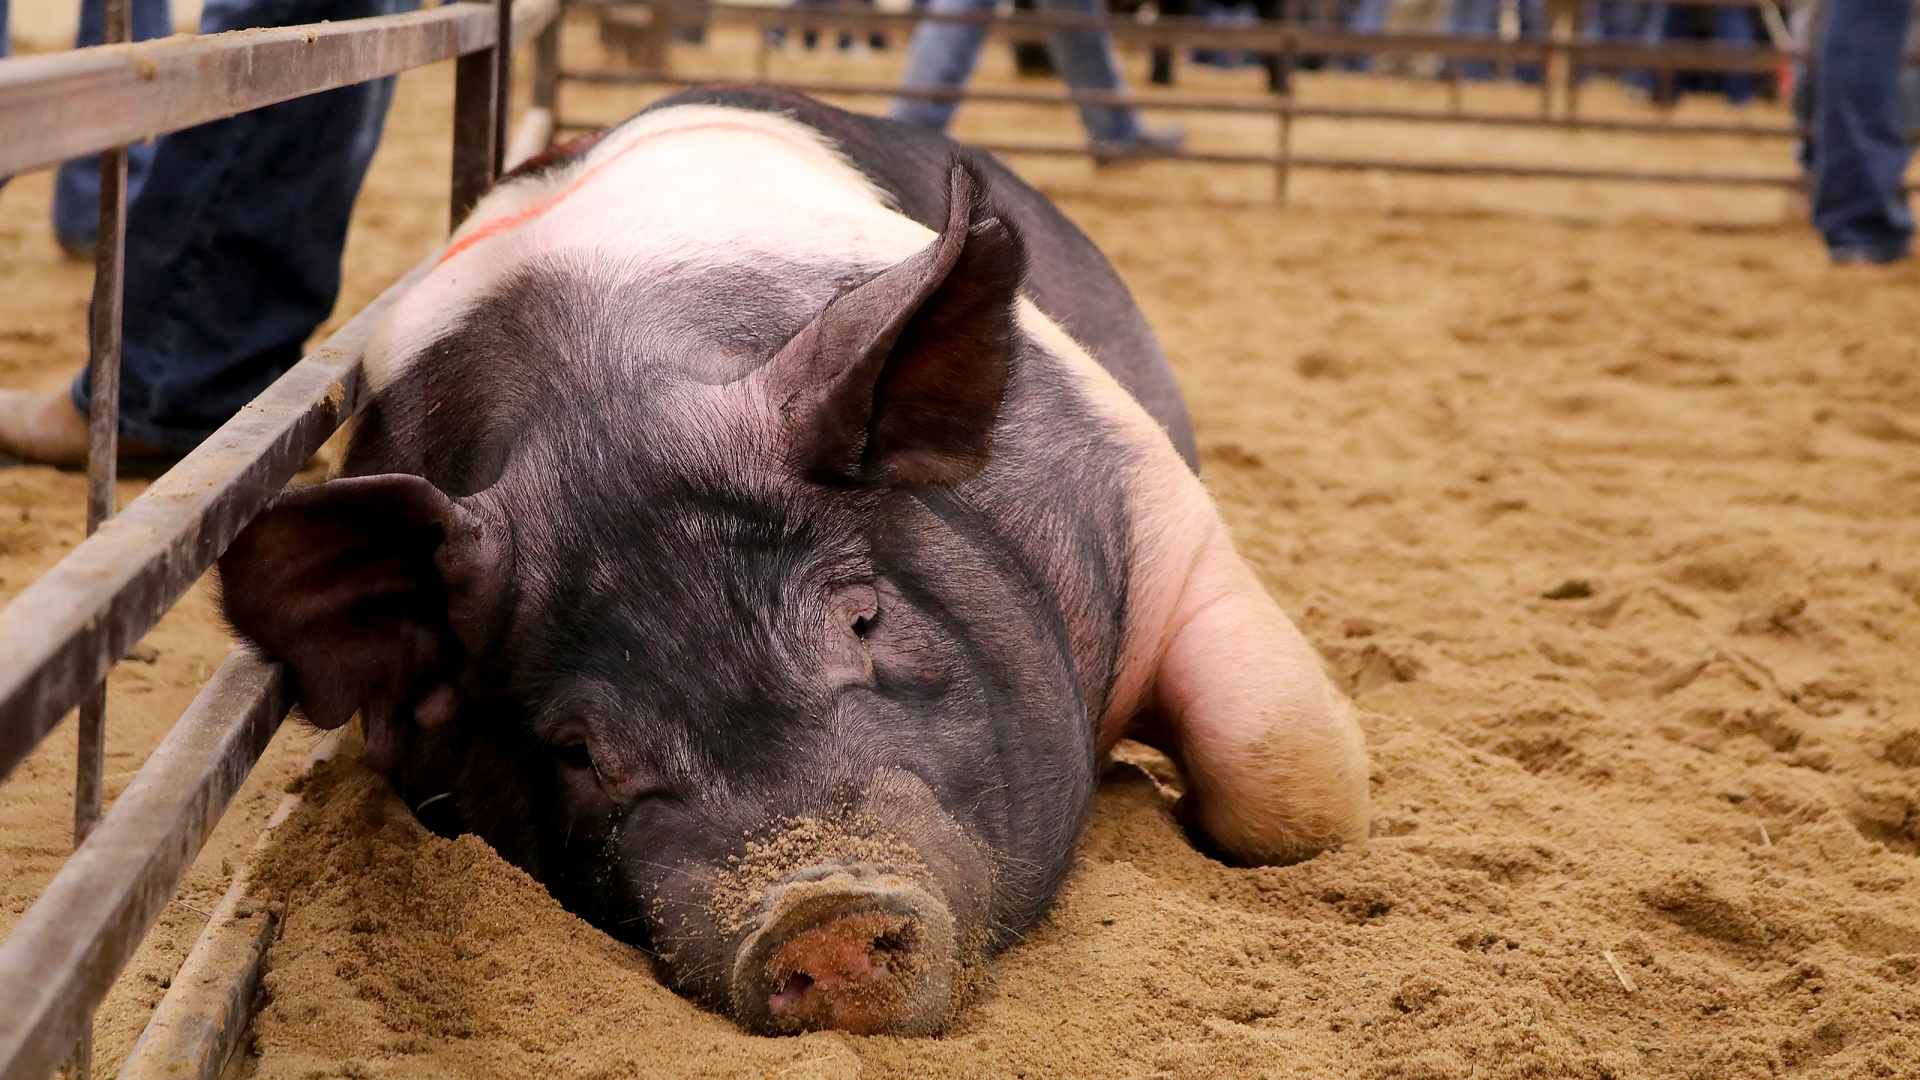 A pig sleping in a pen.